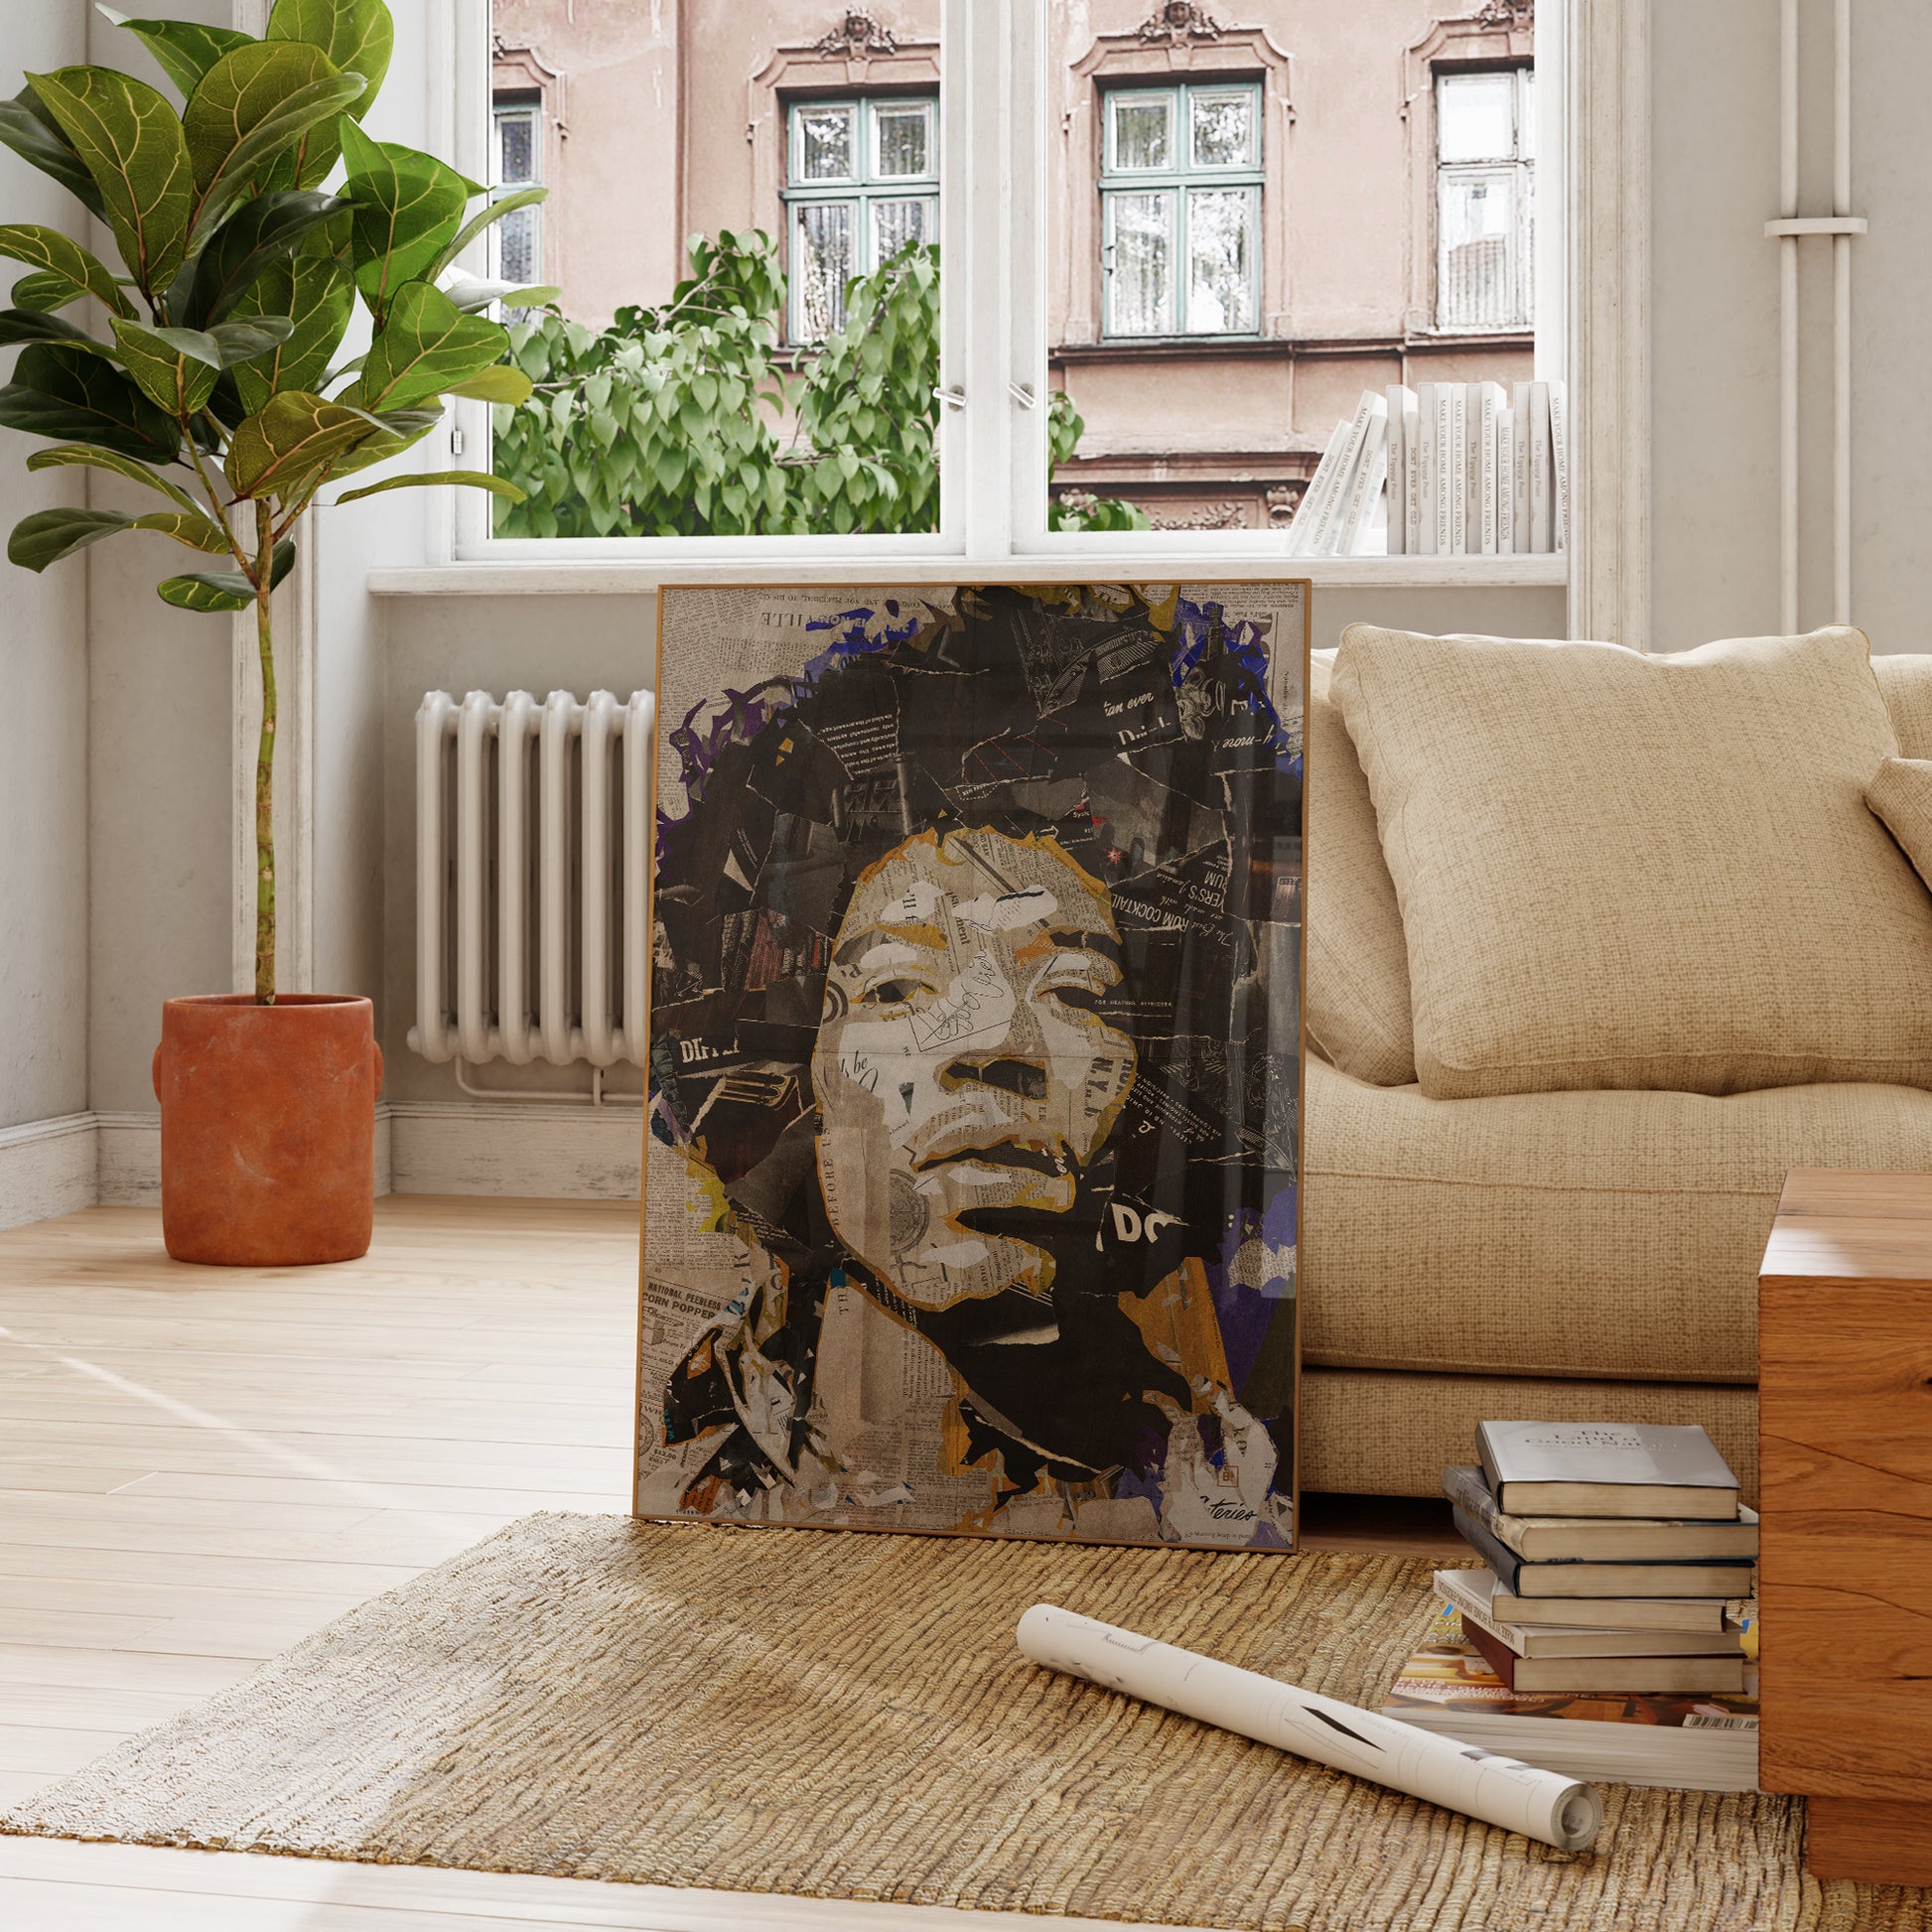 Be inspired by our iconic collage portrait art print of Jimi Hendrix. This artwork was printed using the giclée process on archival acid-free paper and is presented in a French living room, capturing its timeless beauty in every detail.